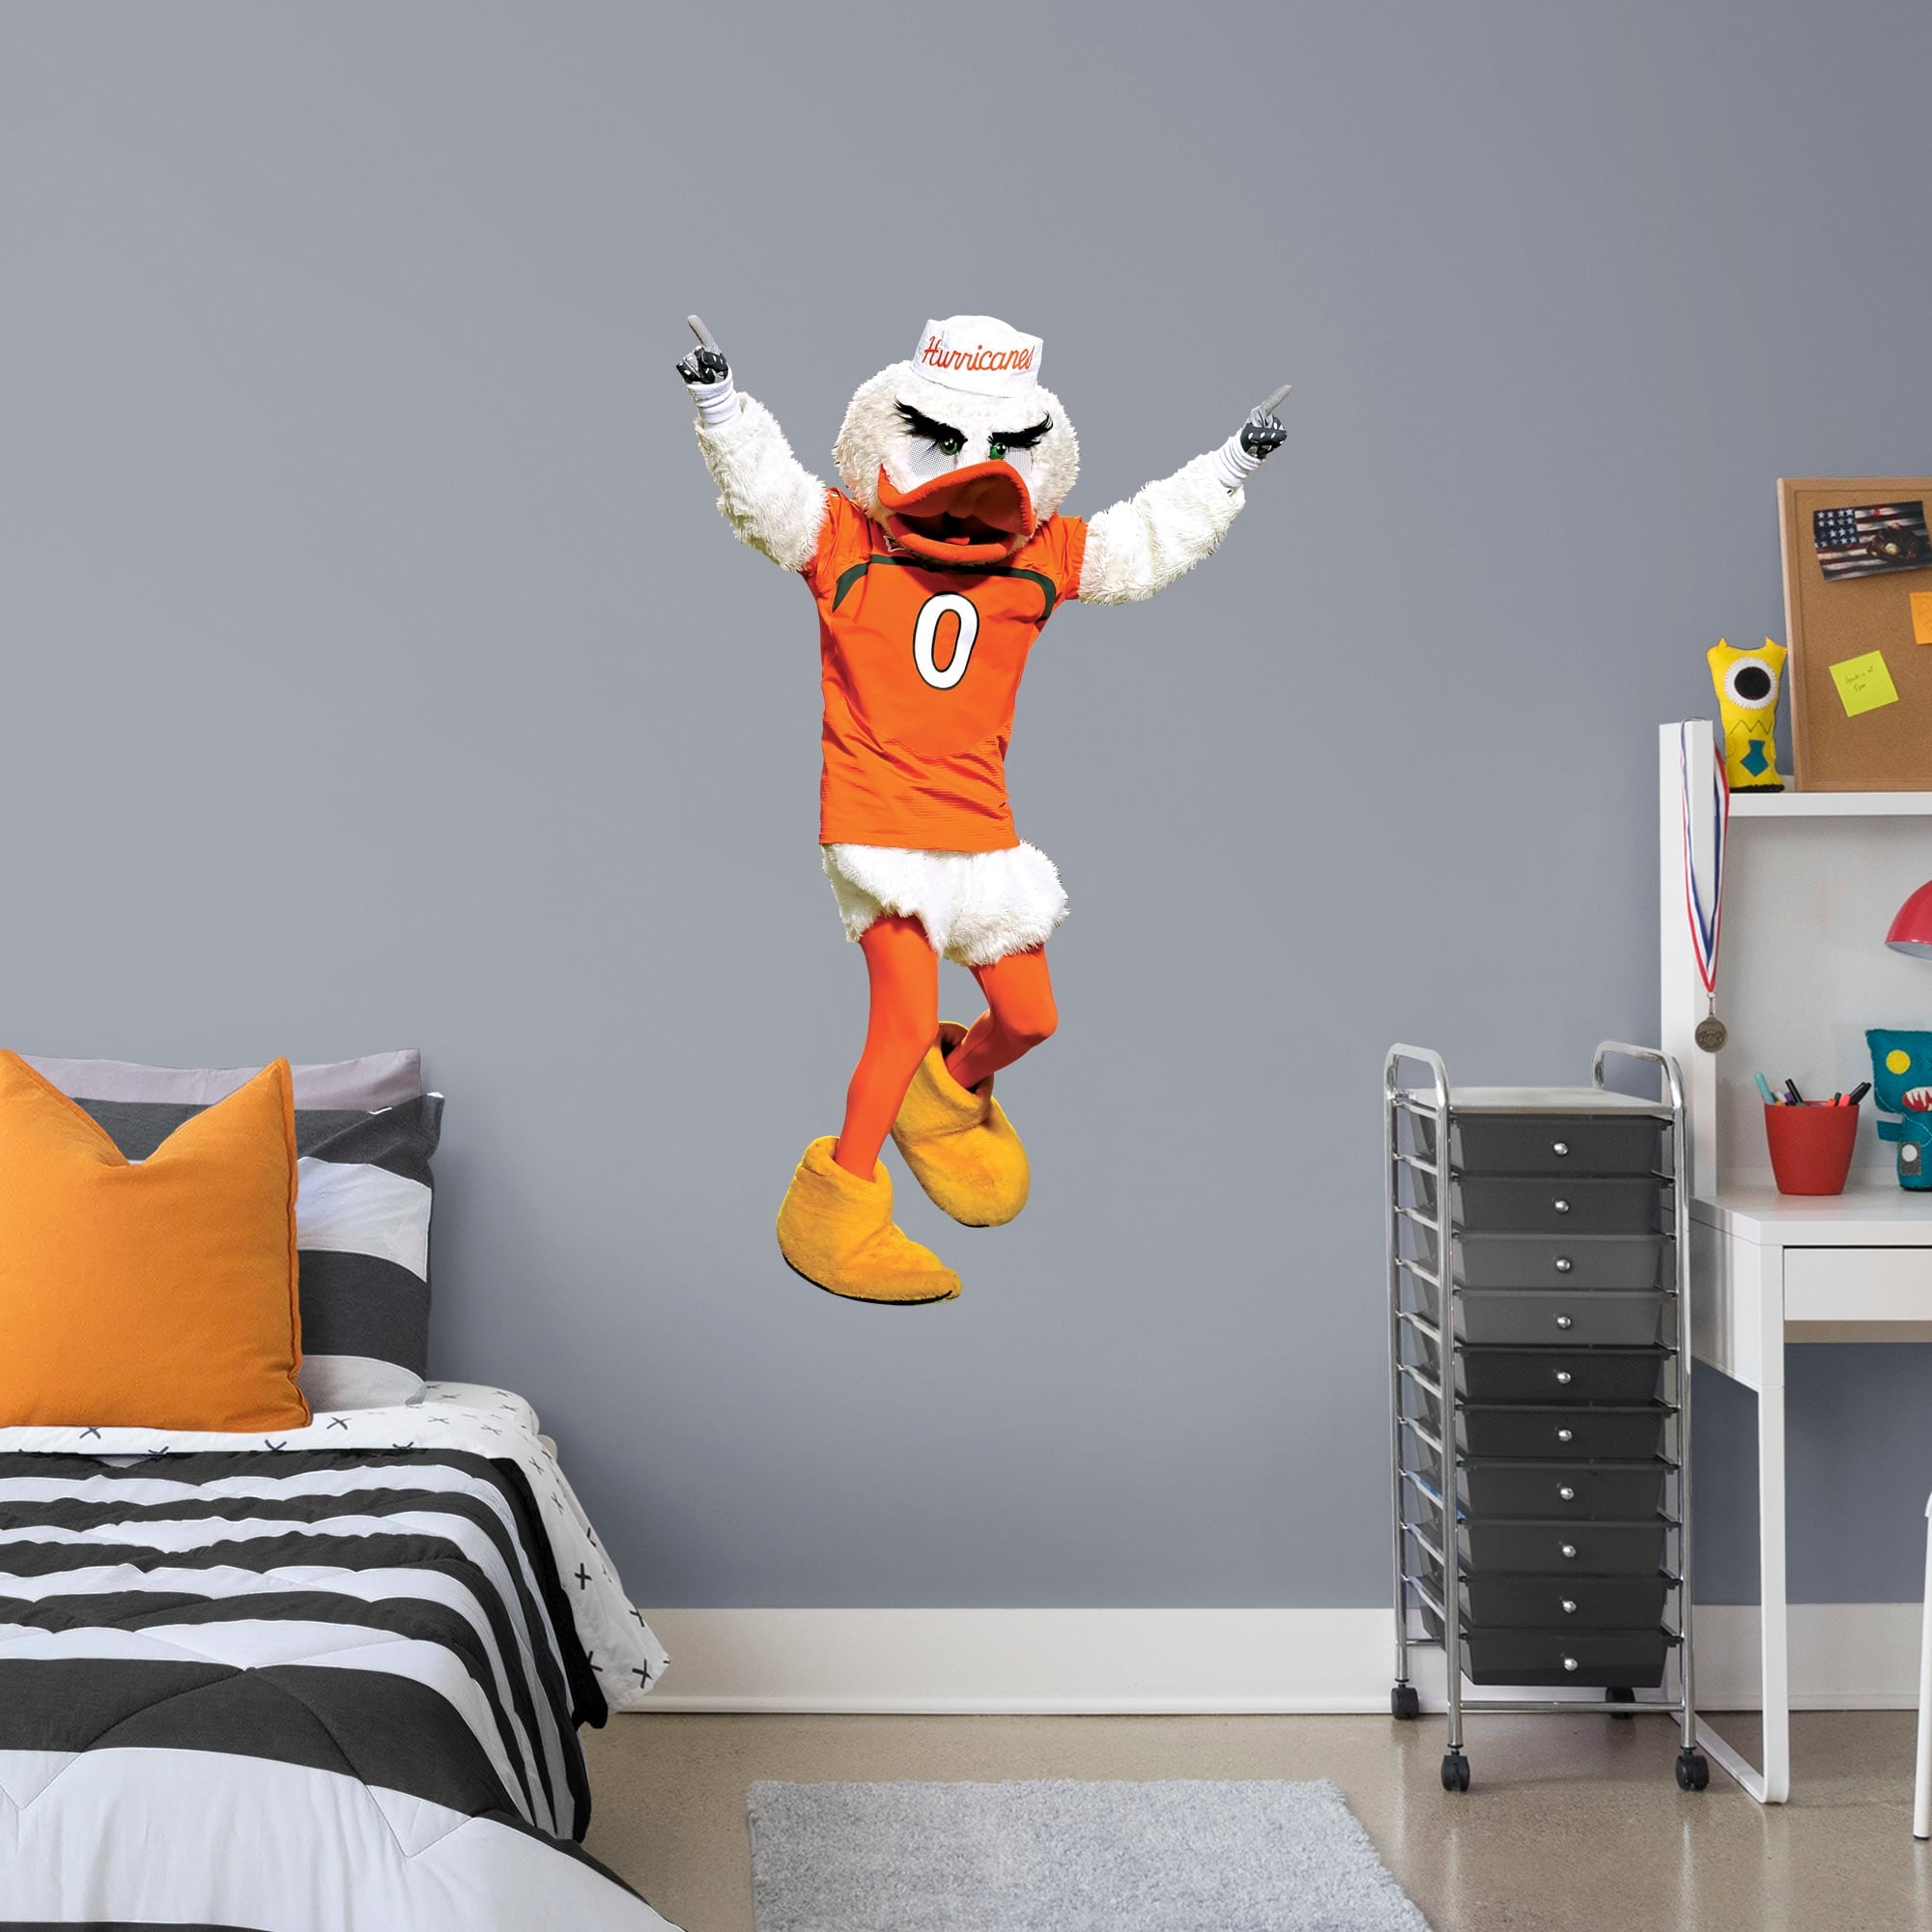 Miami Hurricanes: Sebastian Mascot - Officially Licensed Removable Wall Decal Giant Mascot + 2 Decals (32"W x 51"H) by Fathead |